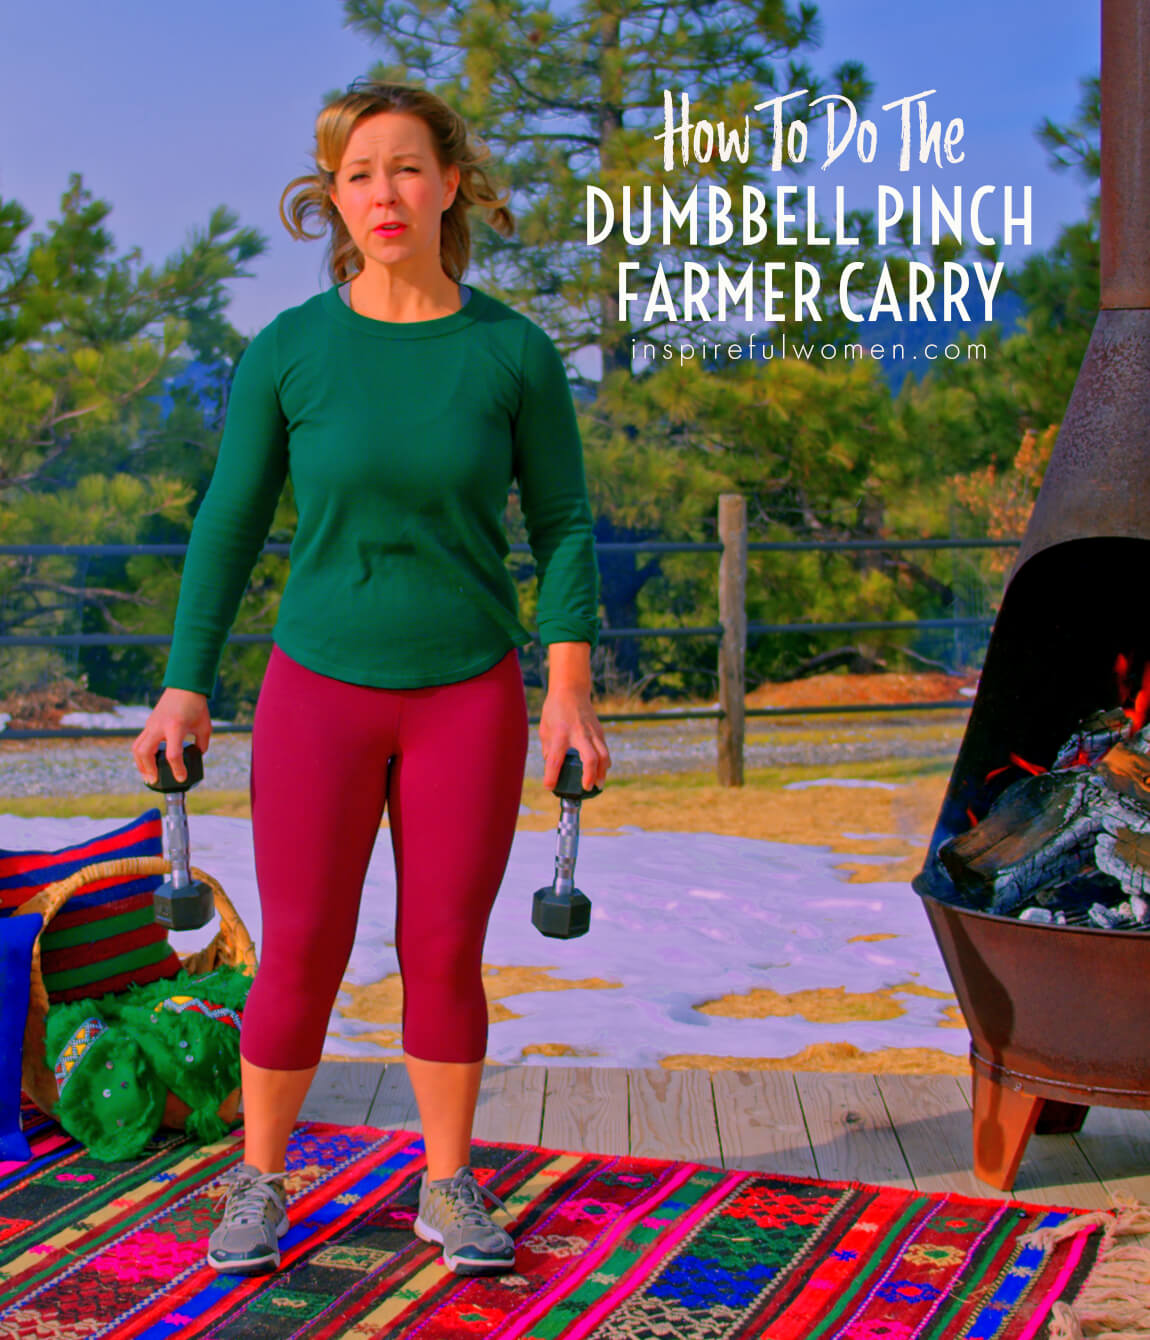 how-to-dumbbell-pinch-farmer-carry-grip-strength-core-exercise-proper-form